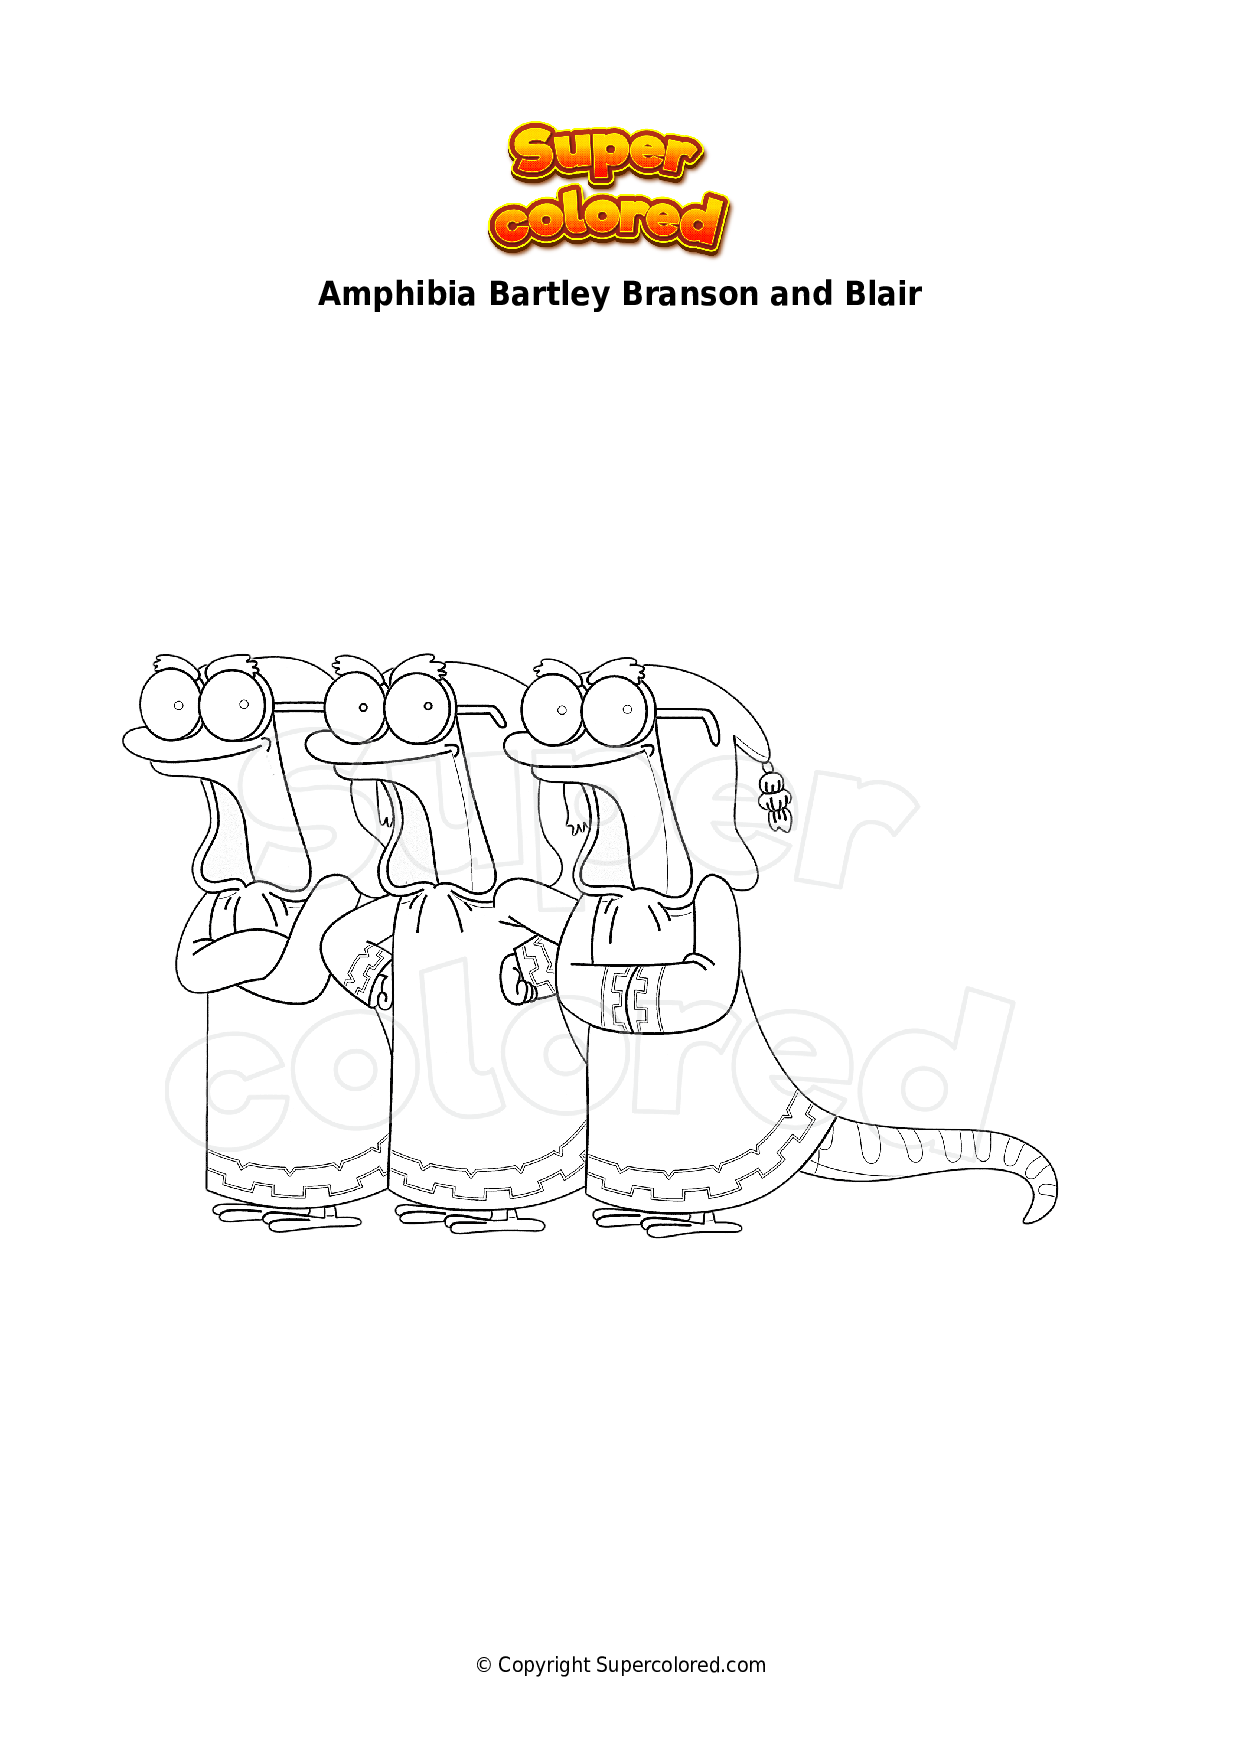 Coloring page Amphibia Bartley Branson and Blair - Supercolored.com